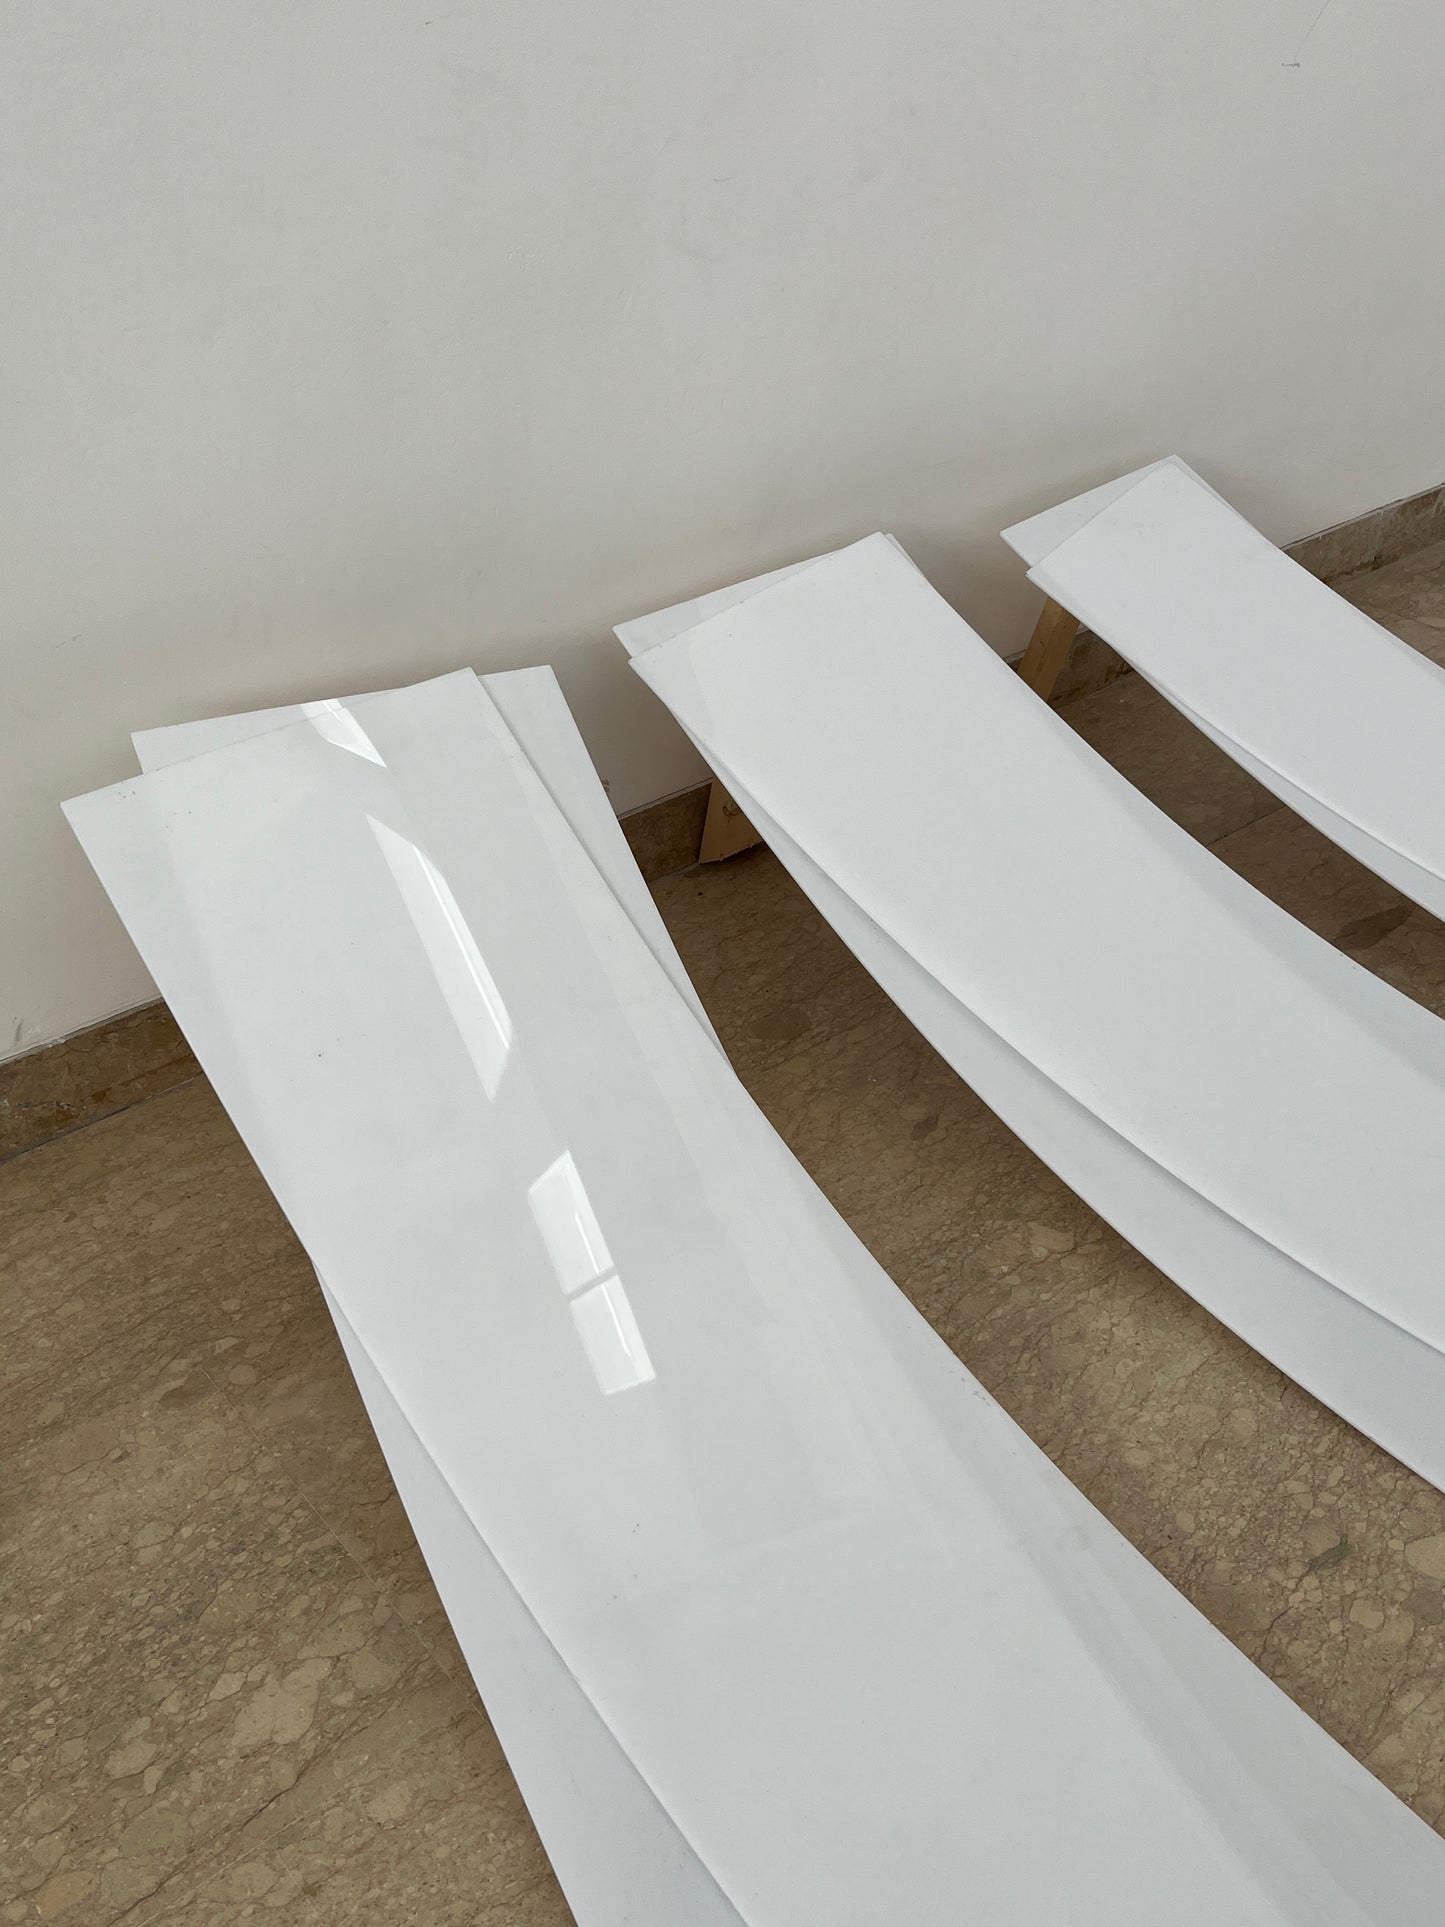 USED UP | Central Pavilion Arsenale | White Acrylic Glass, 4.44a